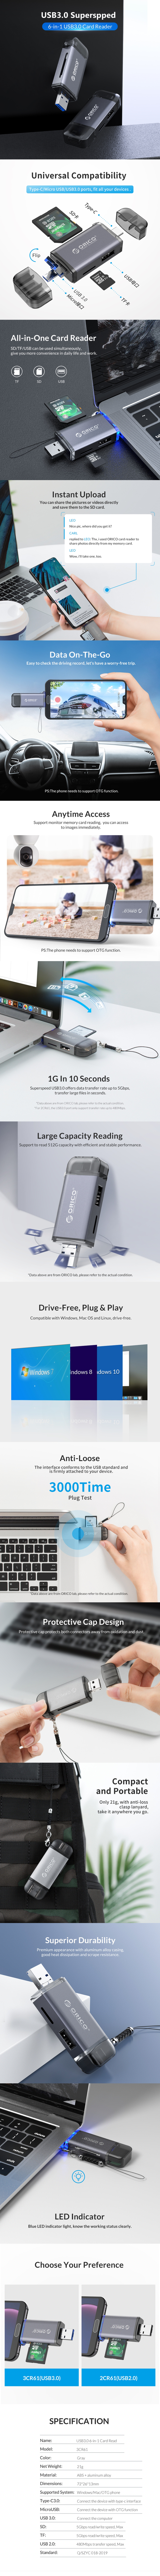 A large marketing image providing additional information about the product ORICO USB3.0 6 Port Card Reader - Additional alt info not provided